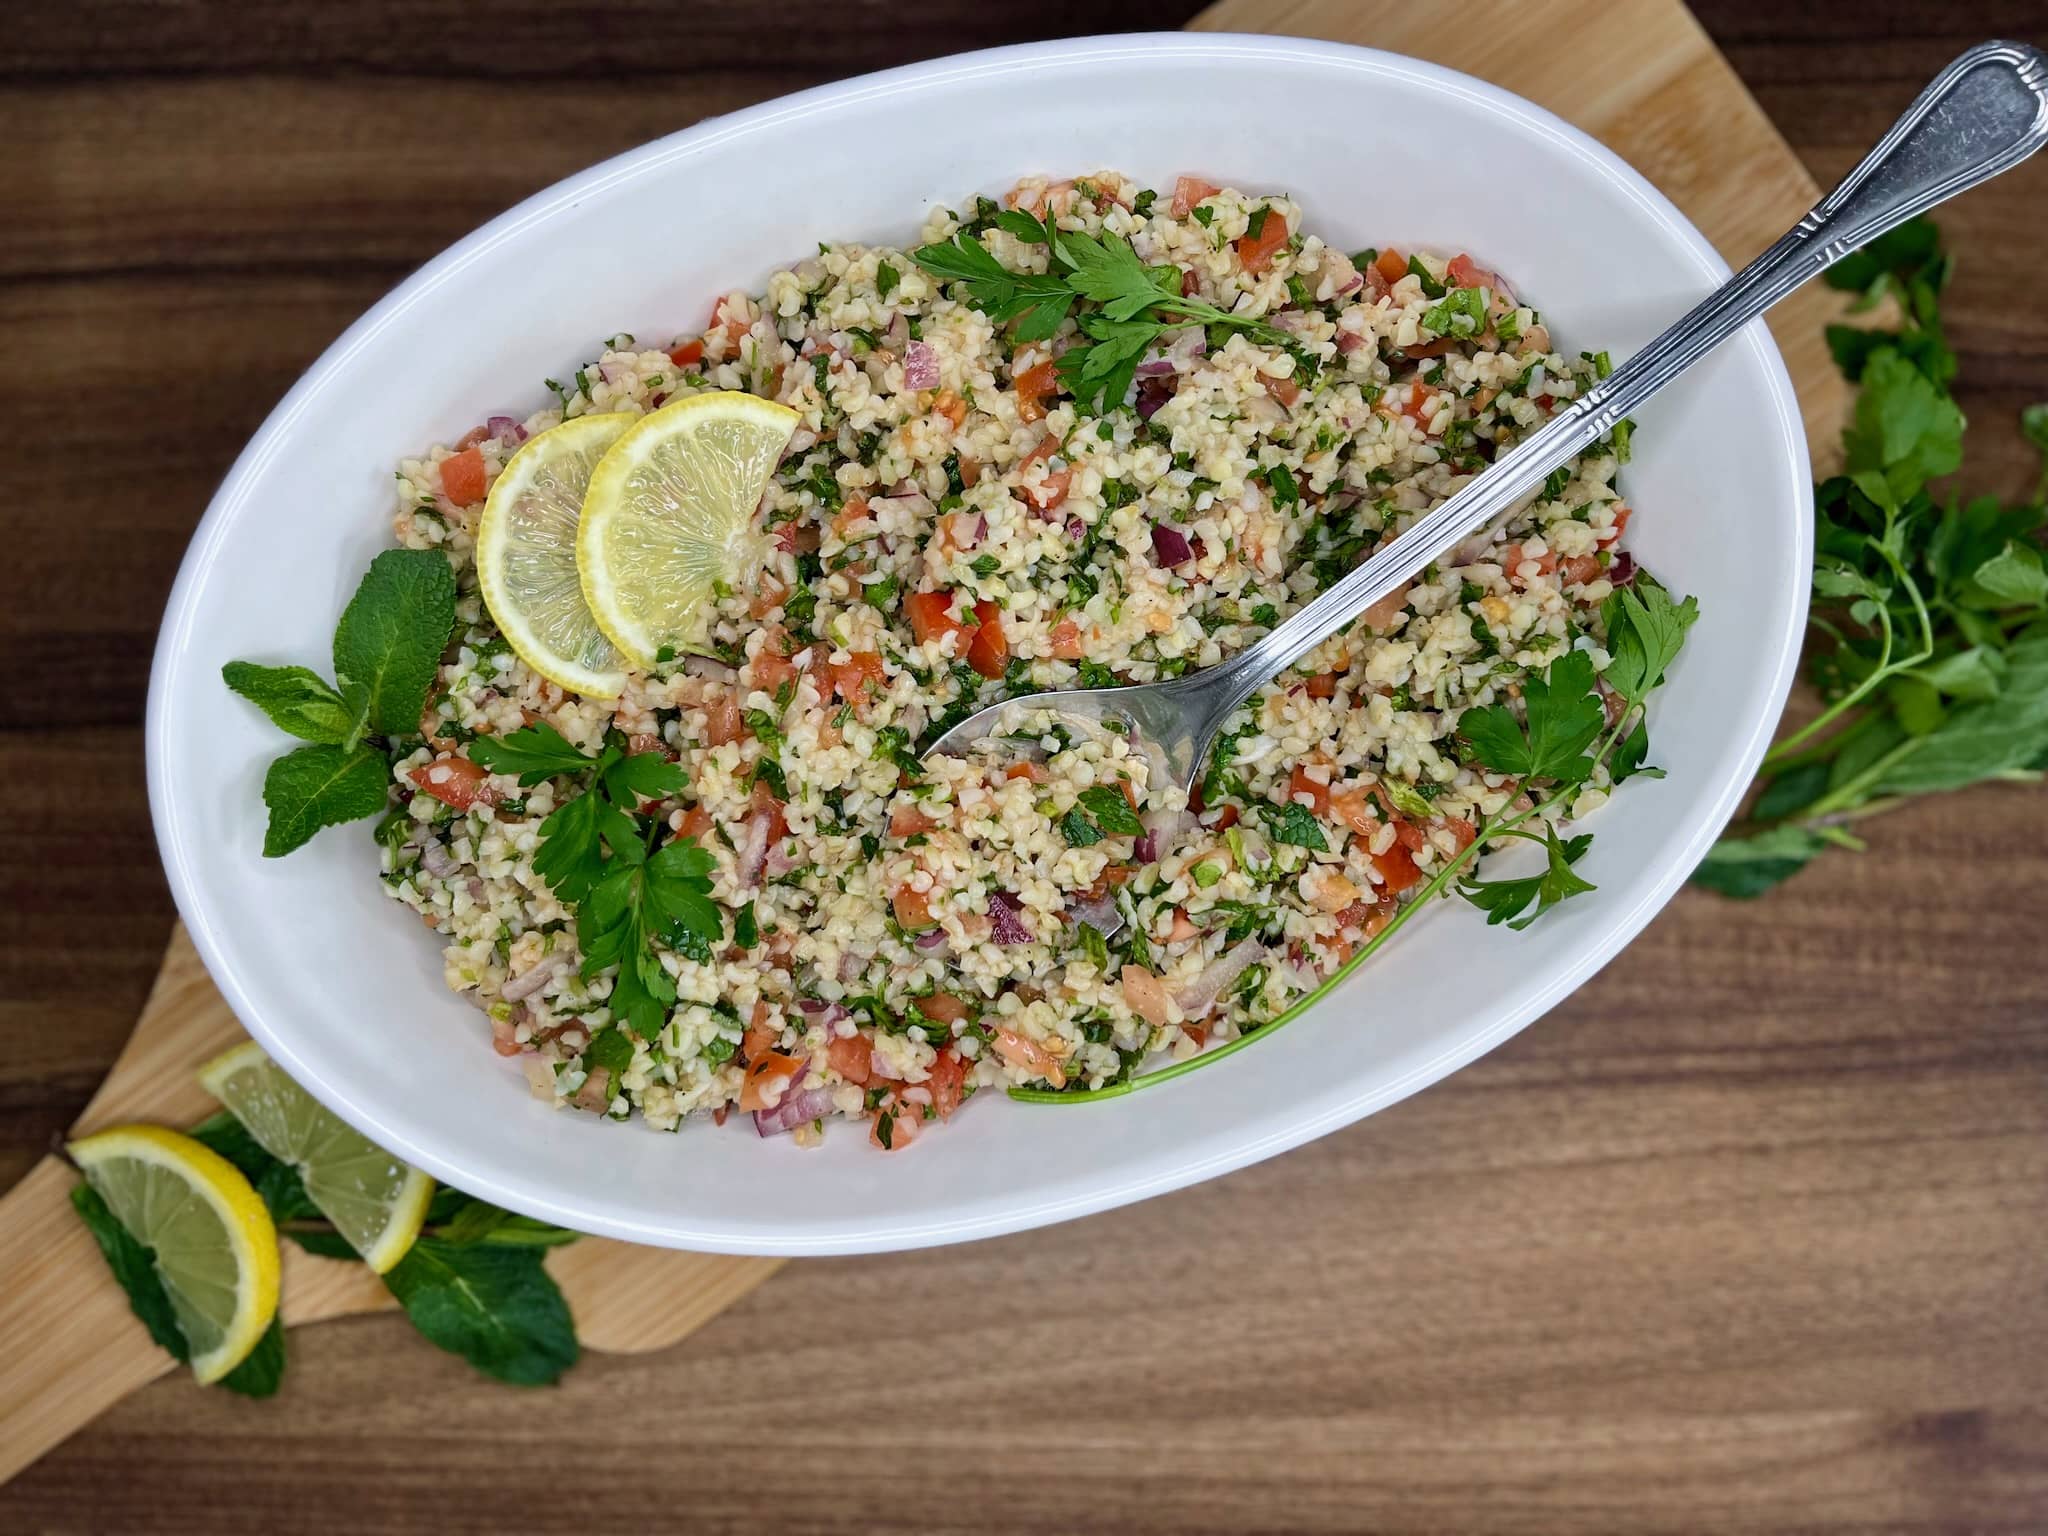 All ingredients mixed creating delicious Tabbouleh